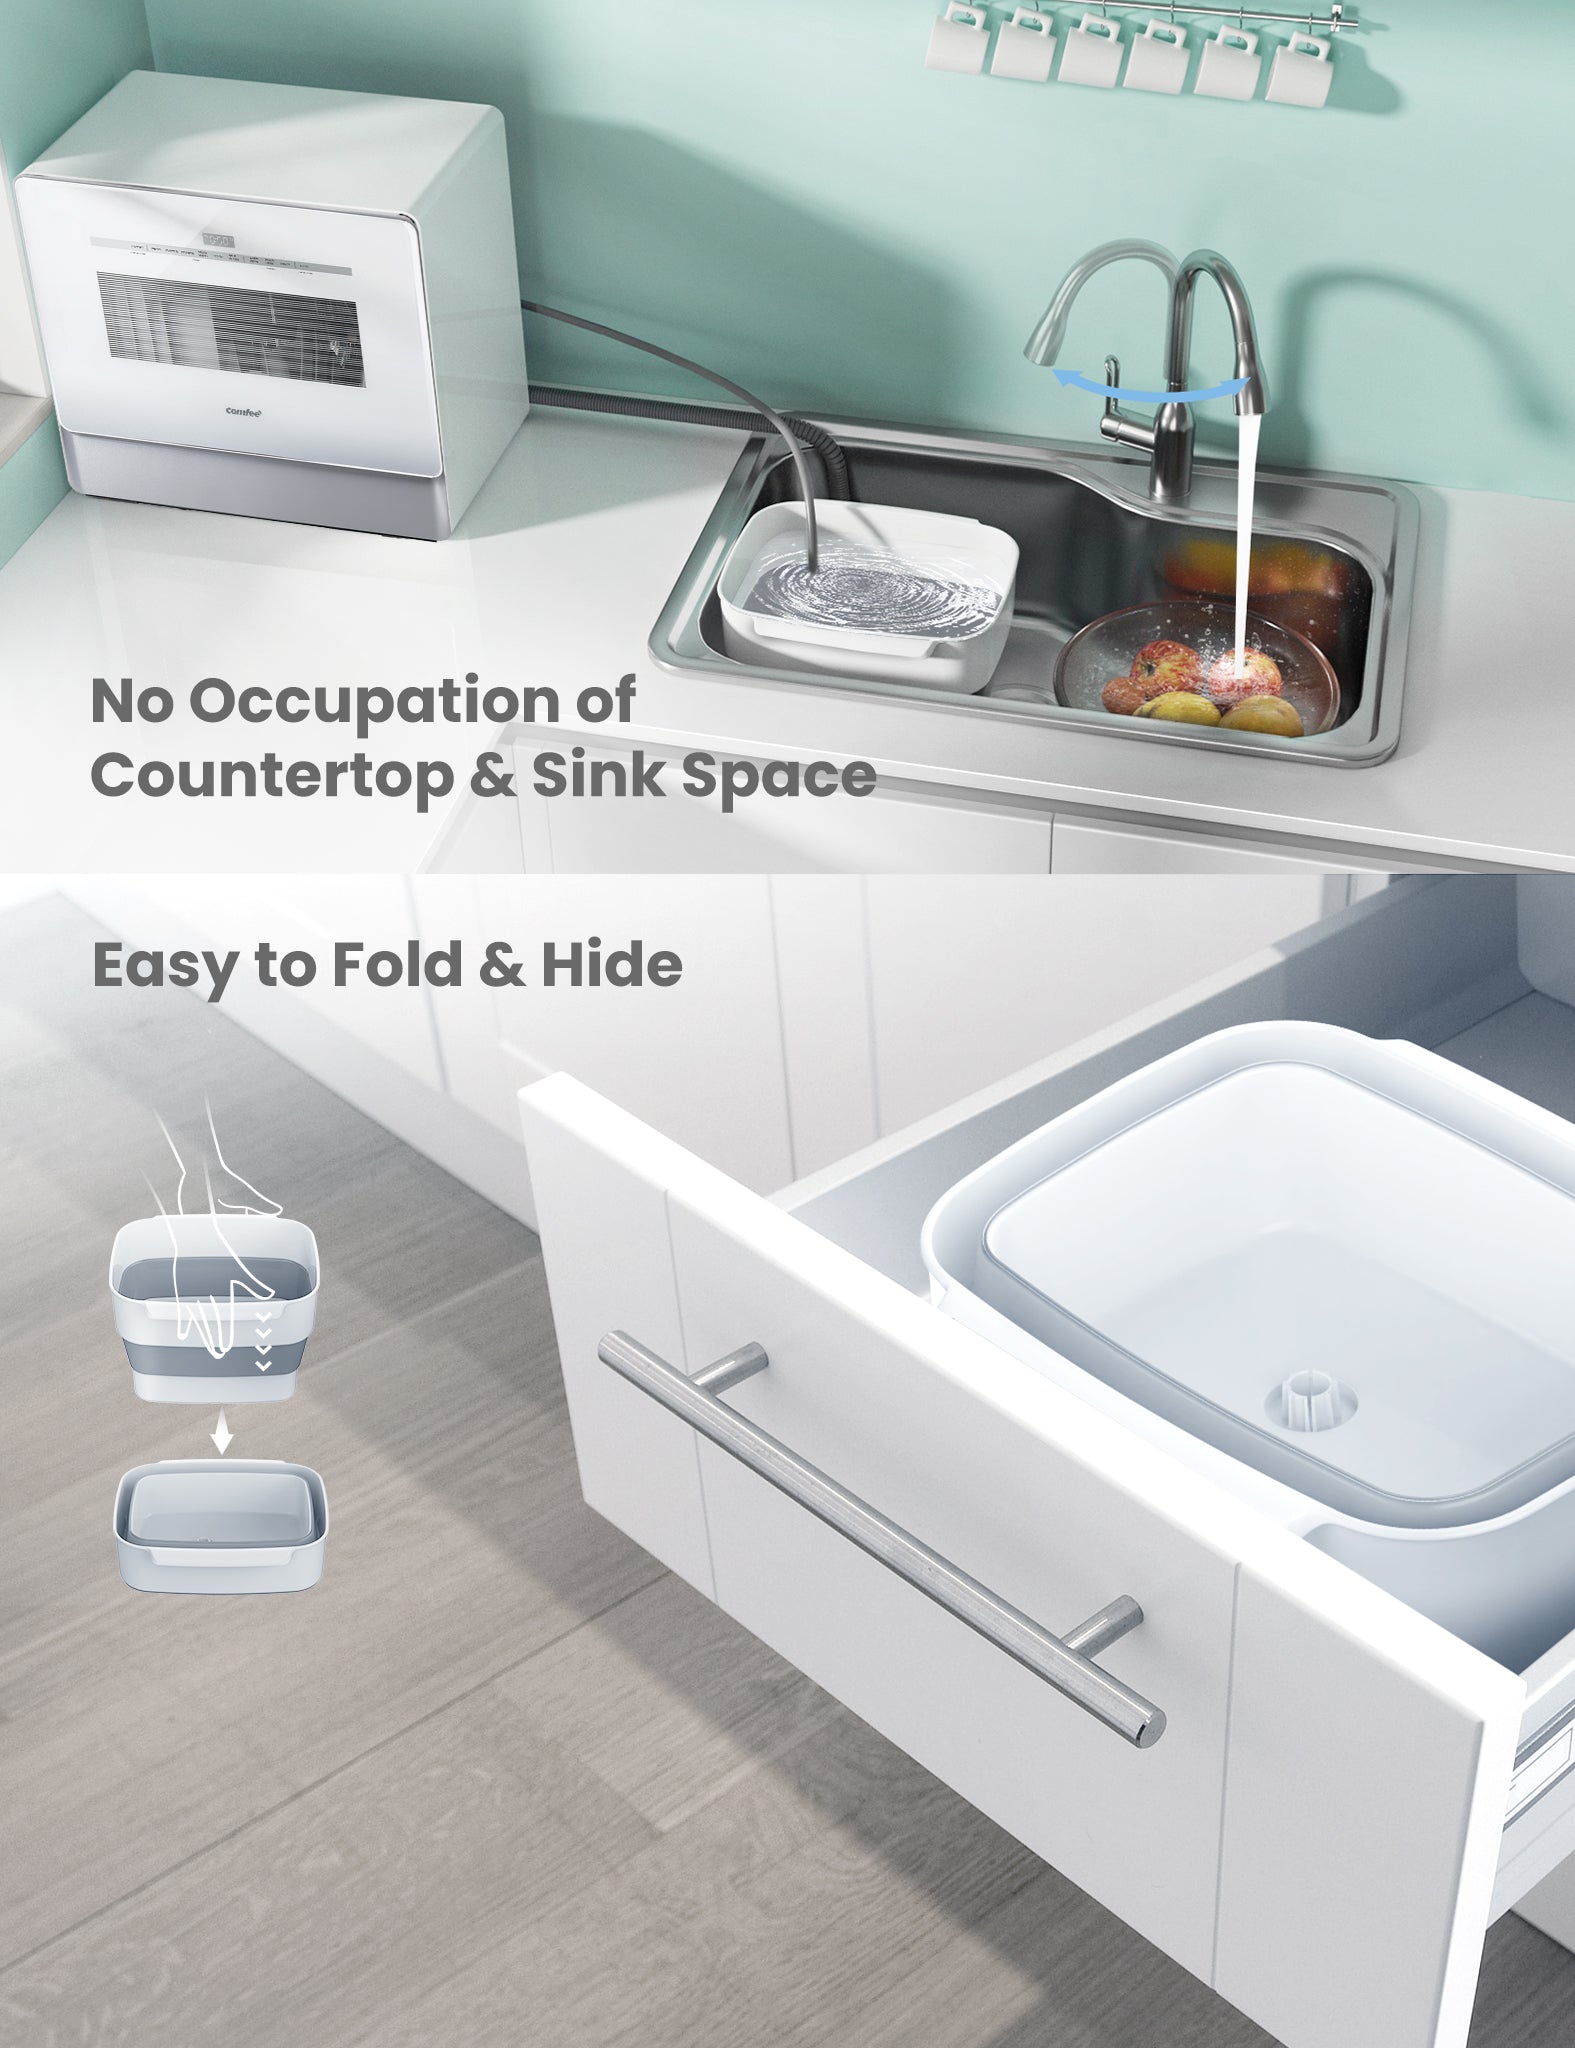 Comfee' Countertop Dishwasher, Portable Dishwasher with 6L Built-In Water Tank, Mini Dishwasher with More Space Inside, 7 Programs, UV Hygiene& Auto